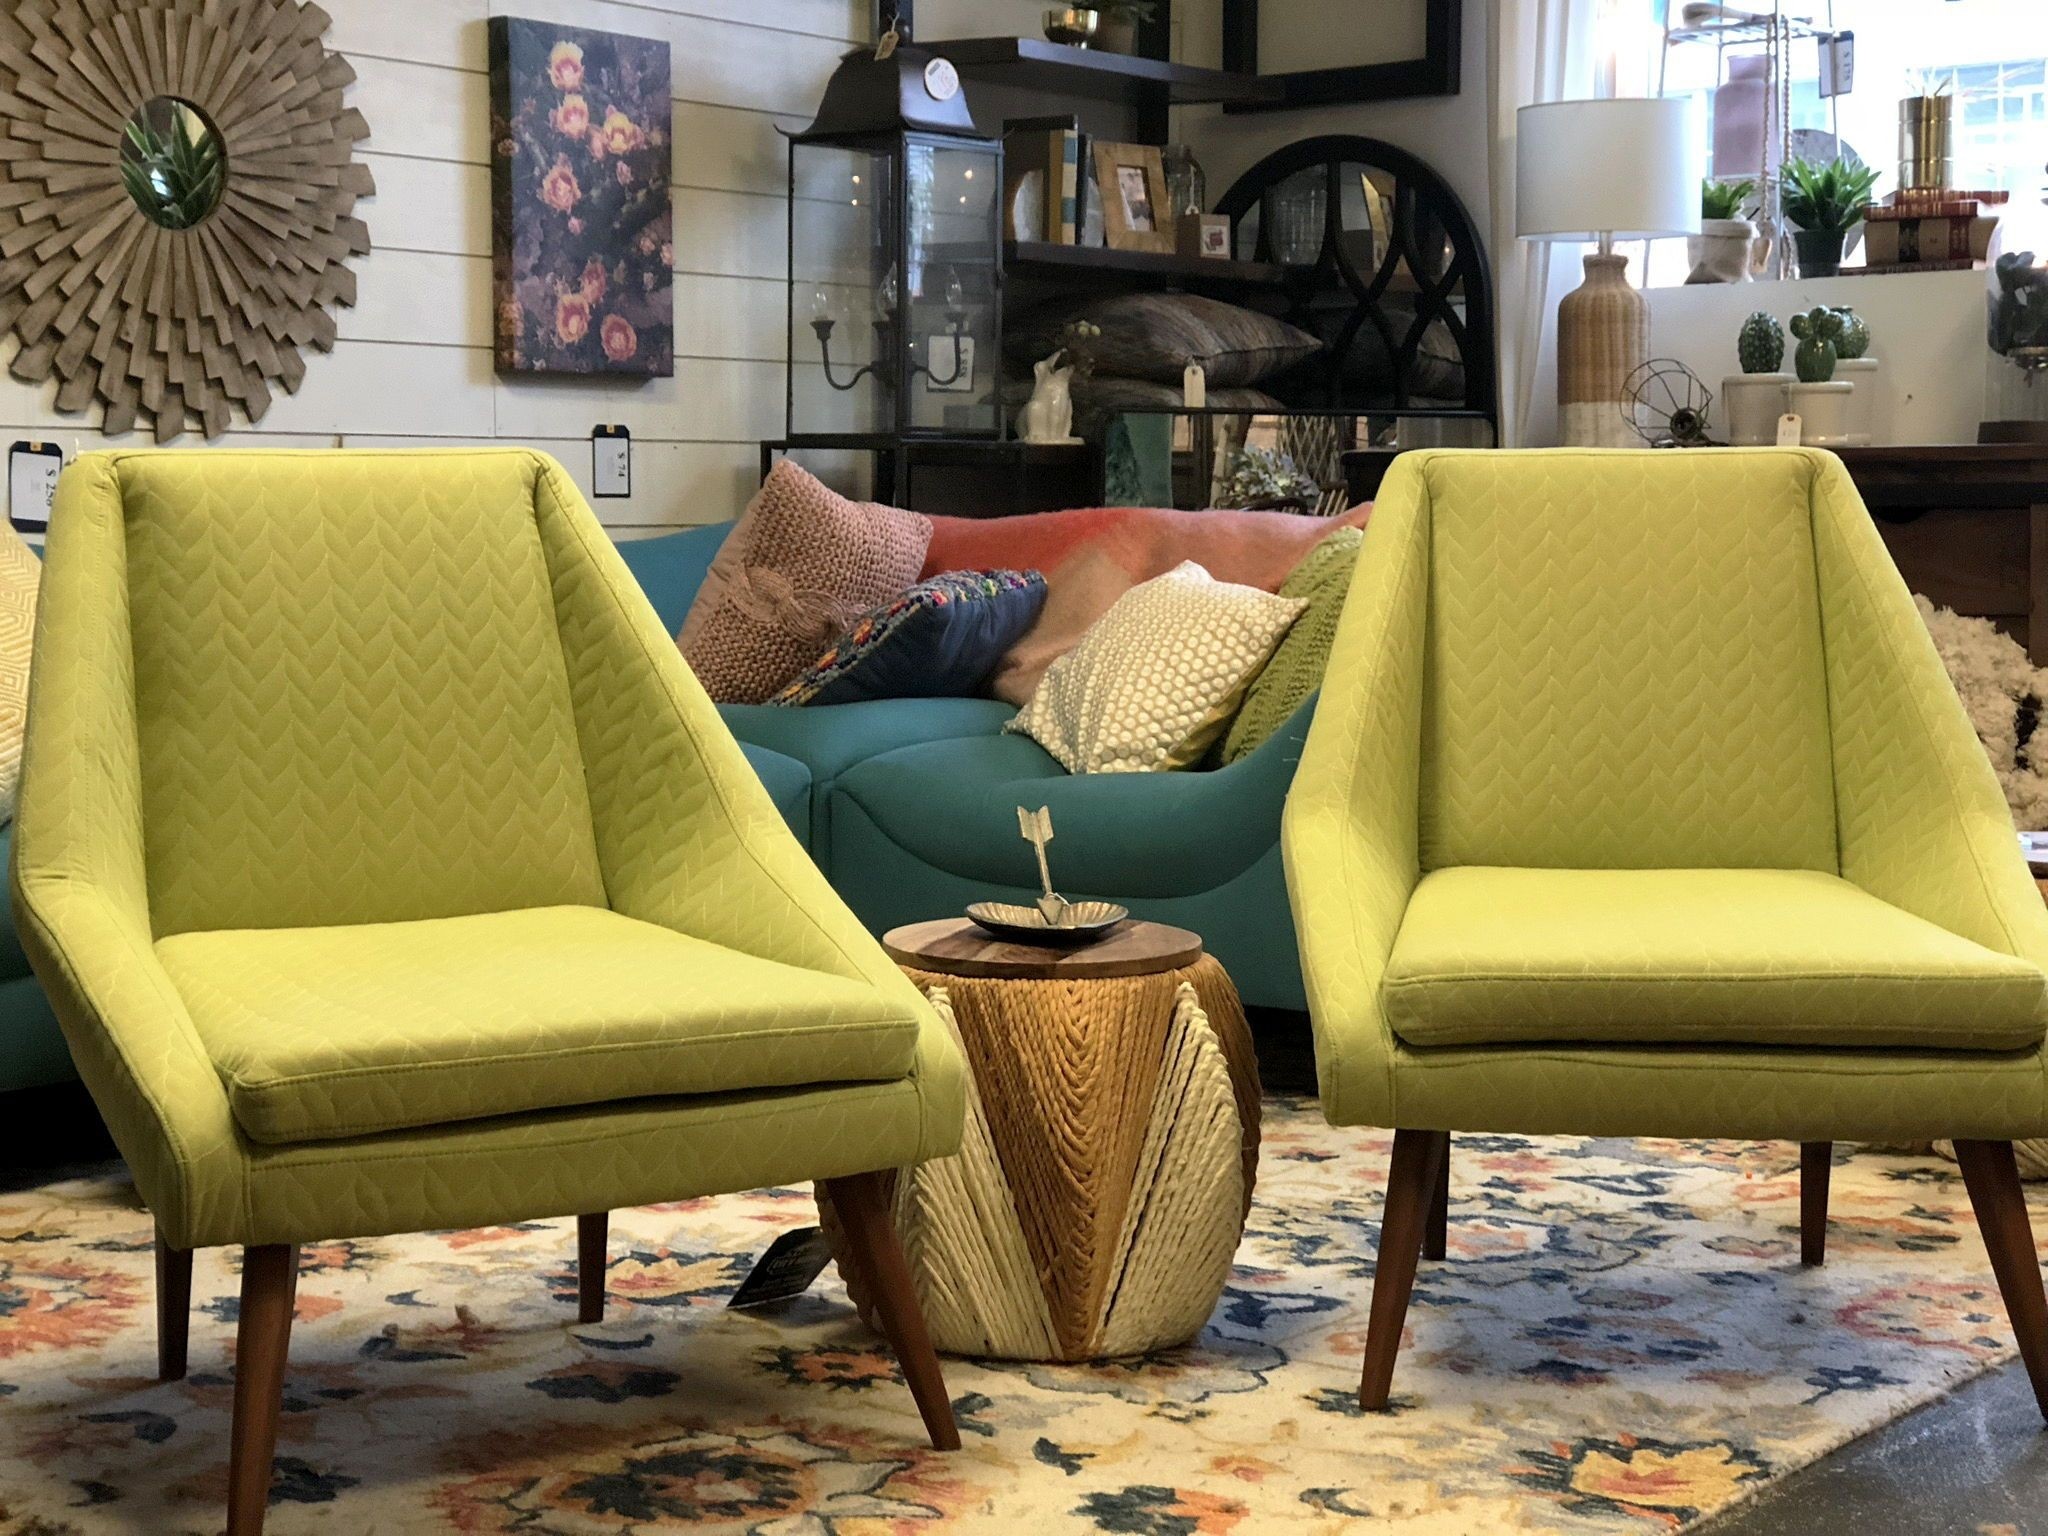 Lime green upholstered chairs at city home home decor